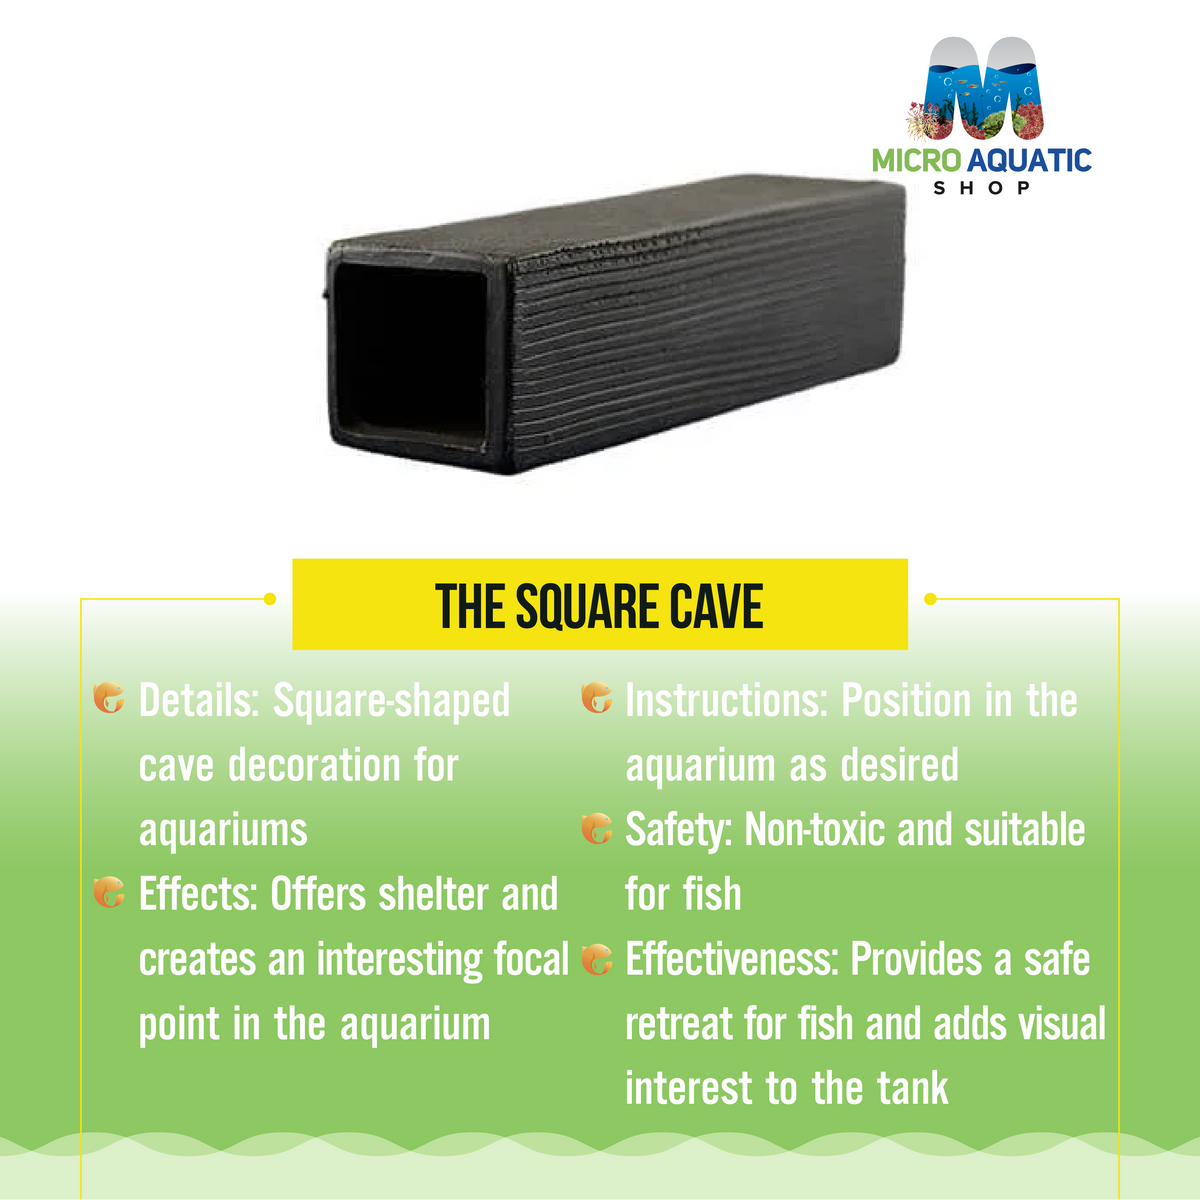 The Square Cave